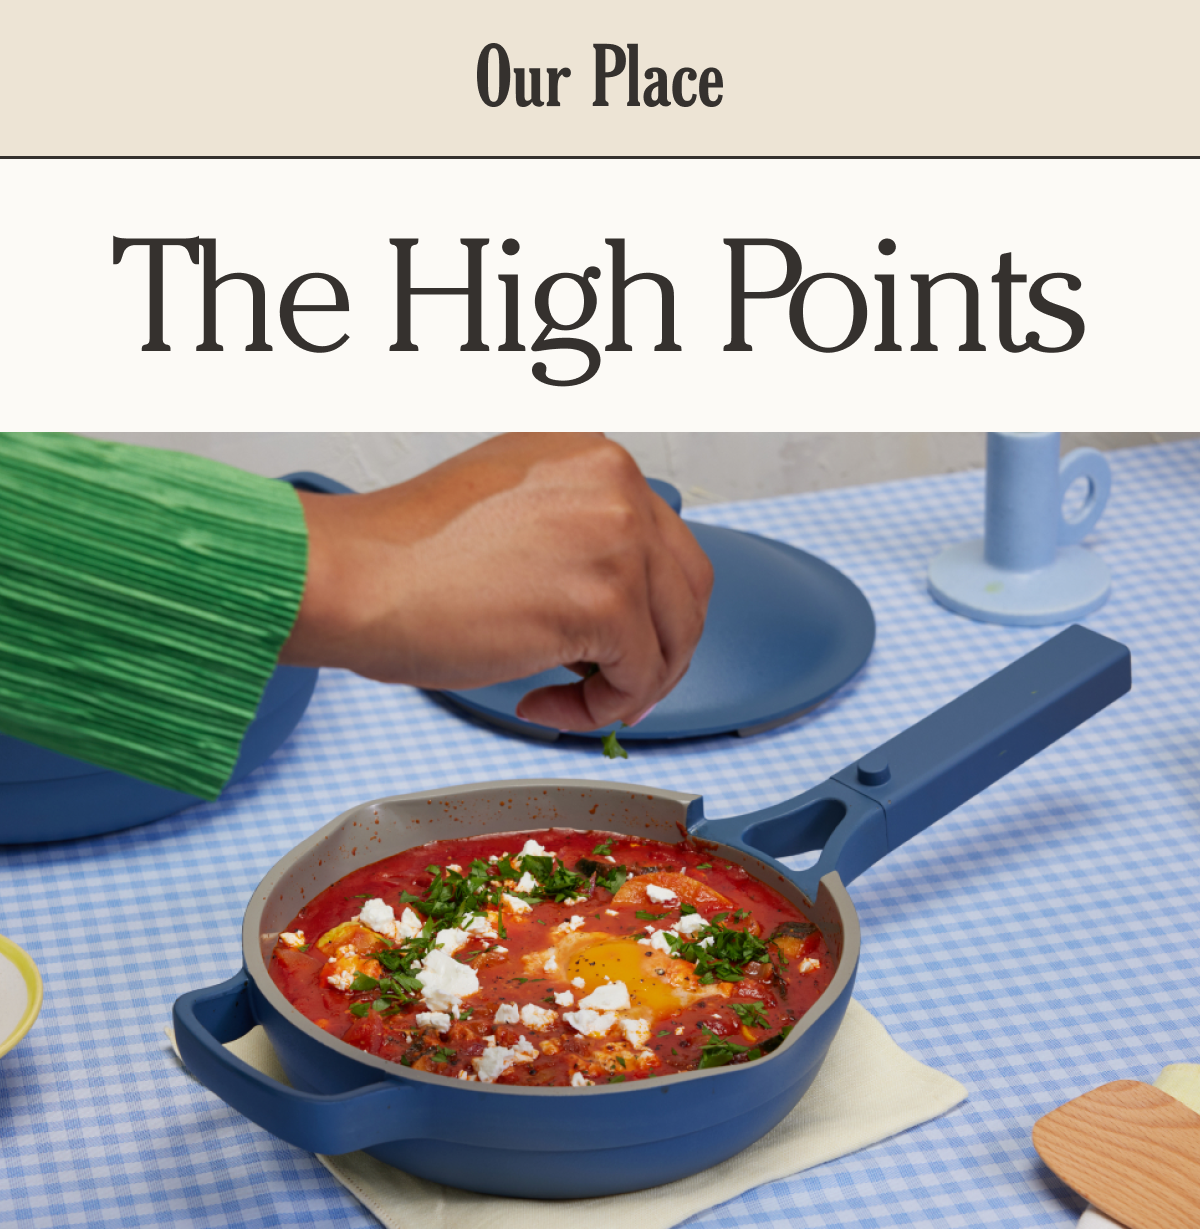 Our Place - The High Points